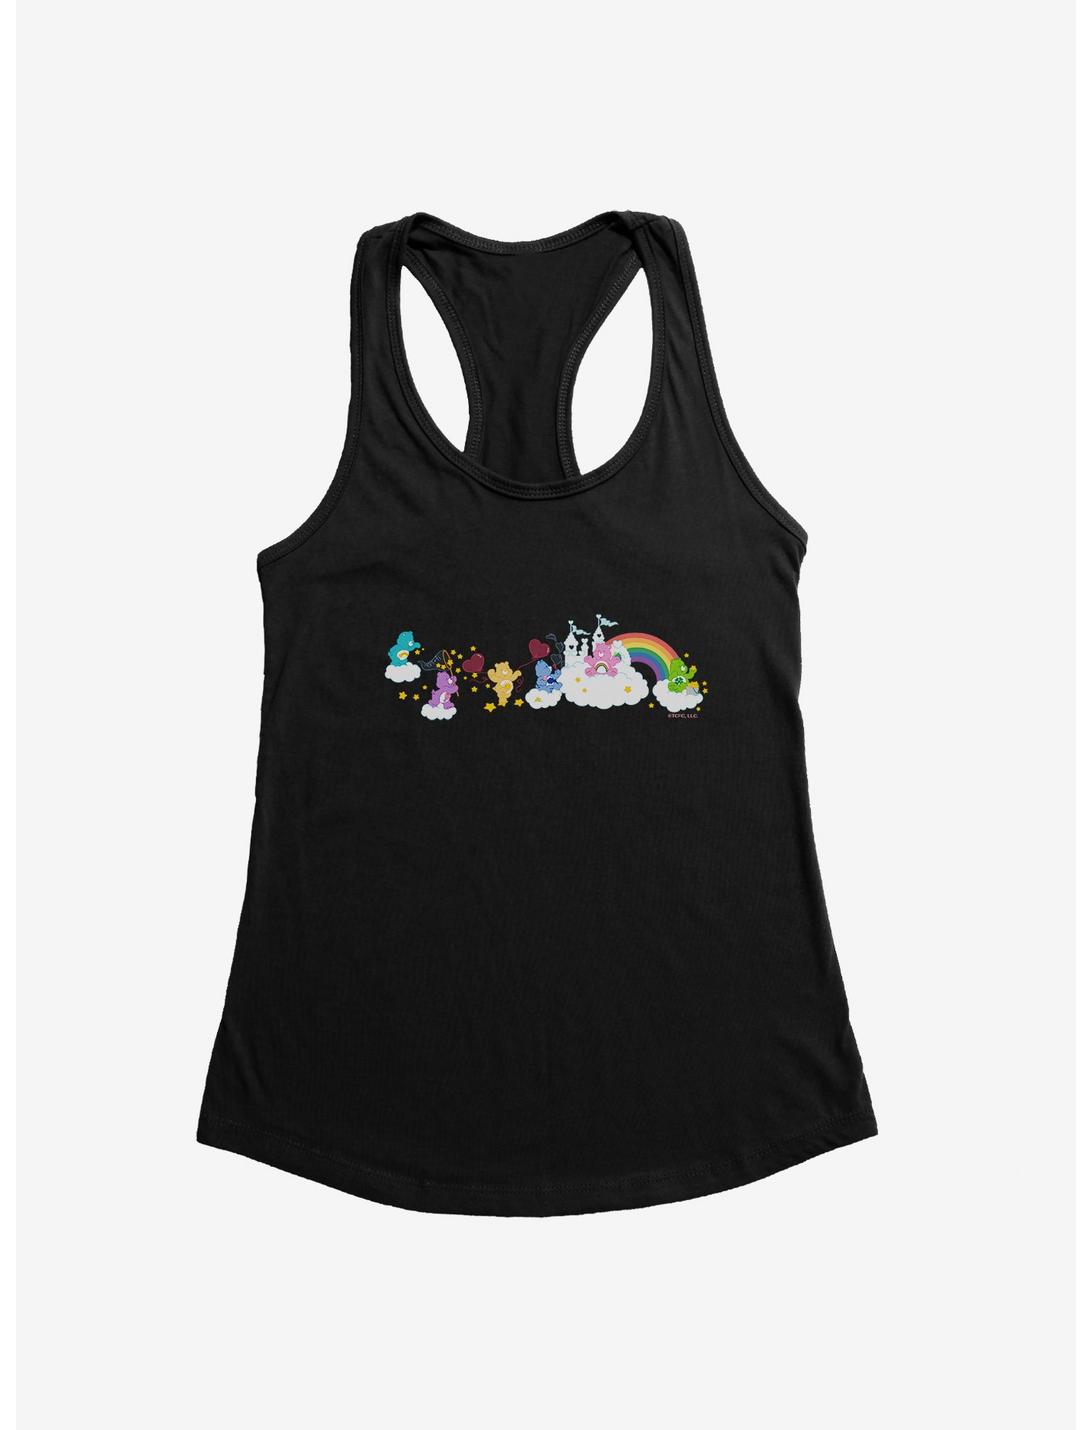 Care Bears Cloudy Playground Womens Tank Top, BLACK, hi-res